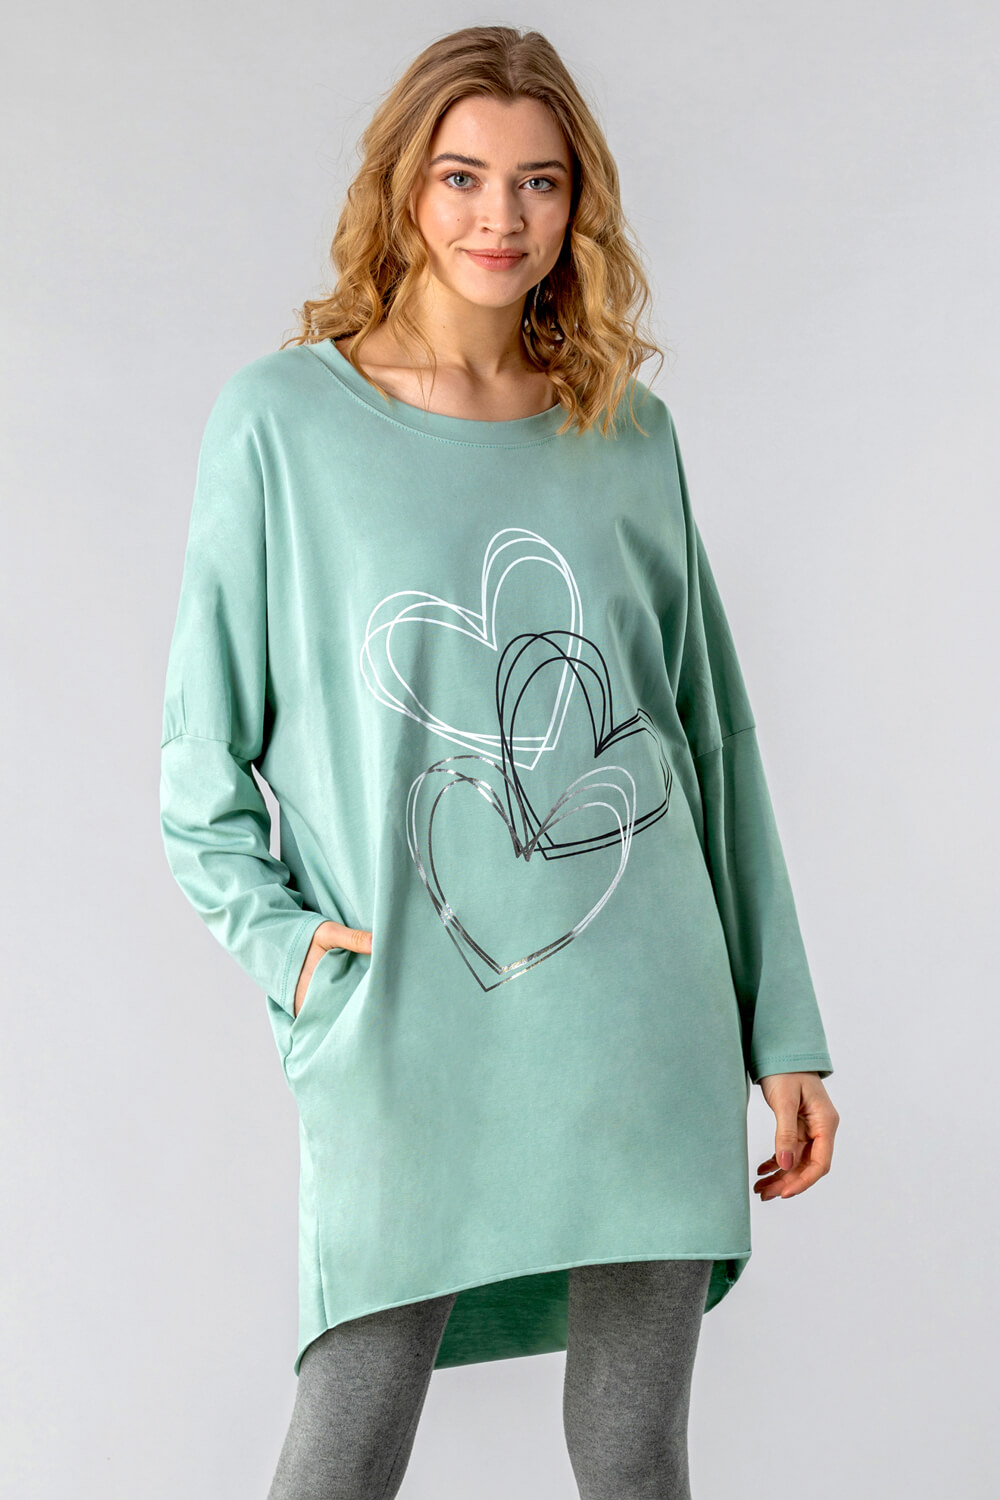 One Size Foil Heart Print Lounge Top